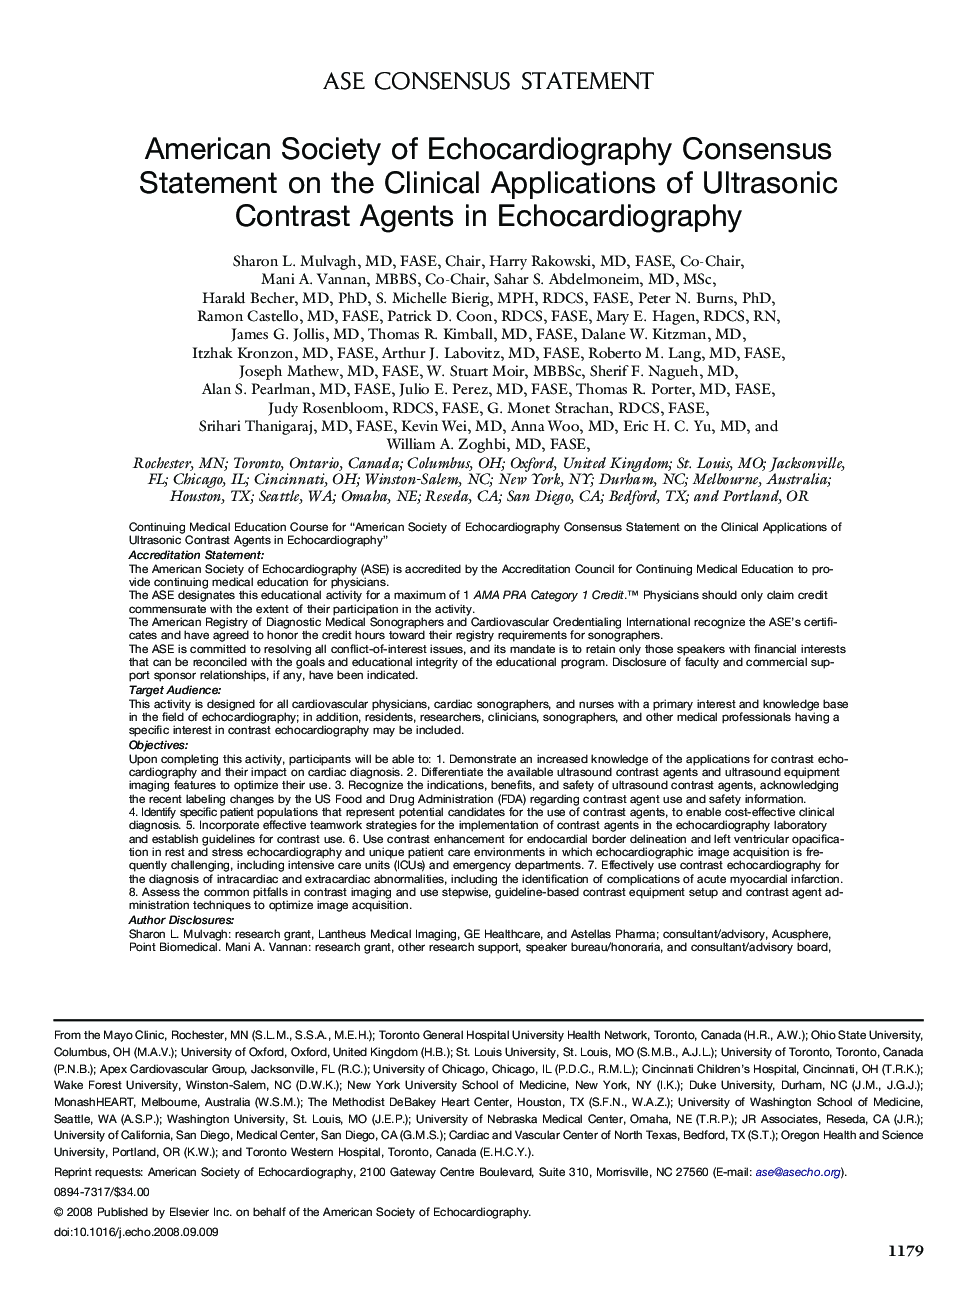 American Society of Echocardiography Consensus Statement on the Clinical Applications of Ultrasonic Contrast Agents in Echocardiography